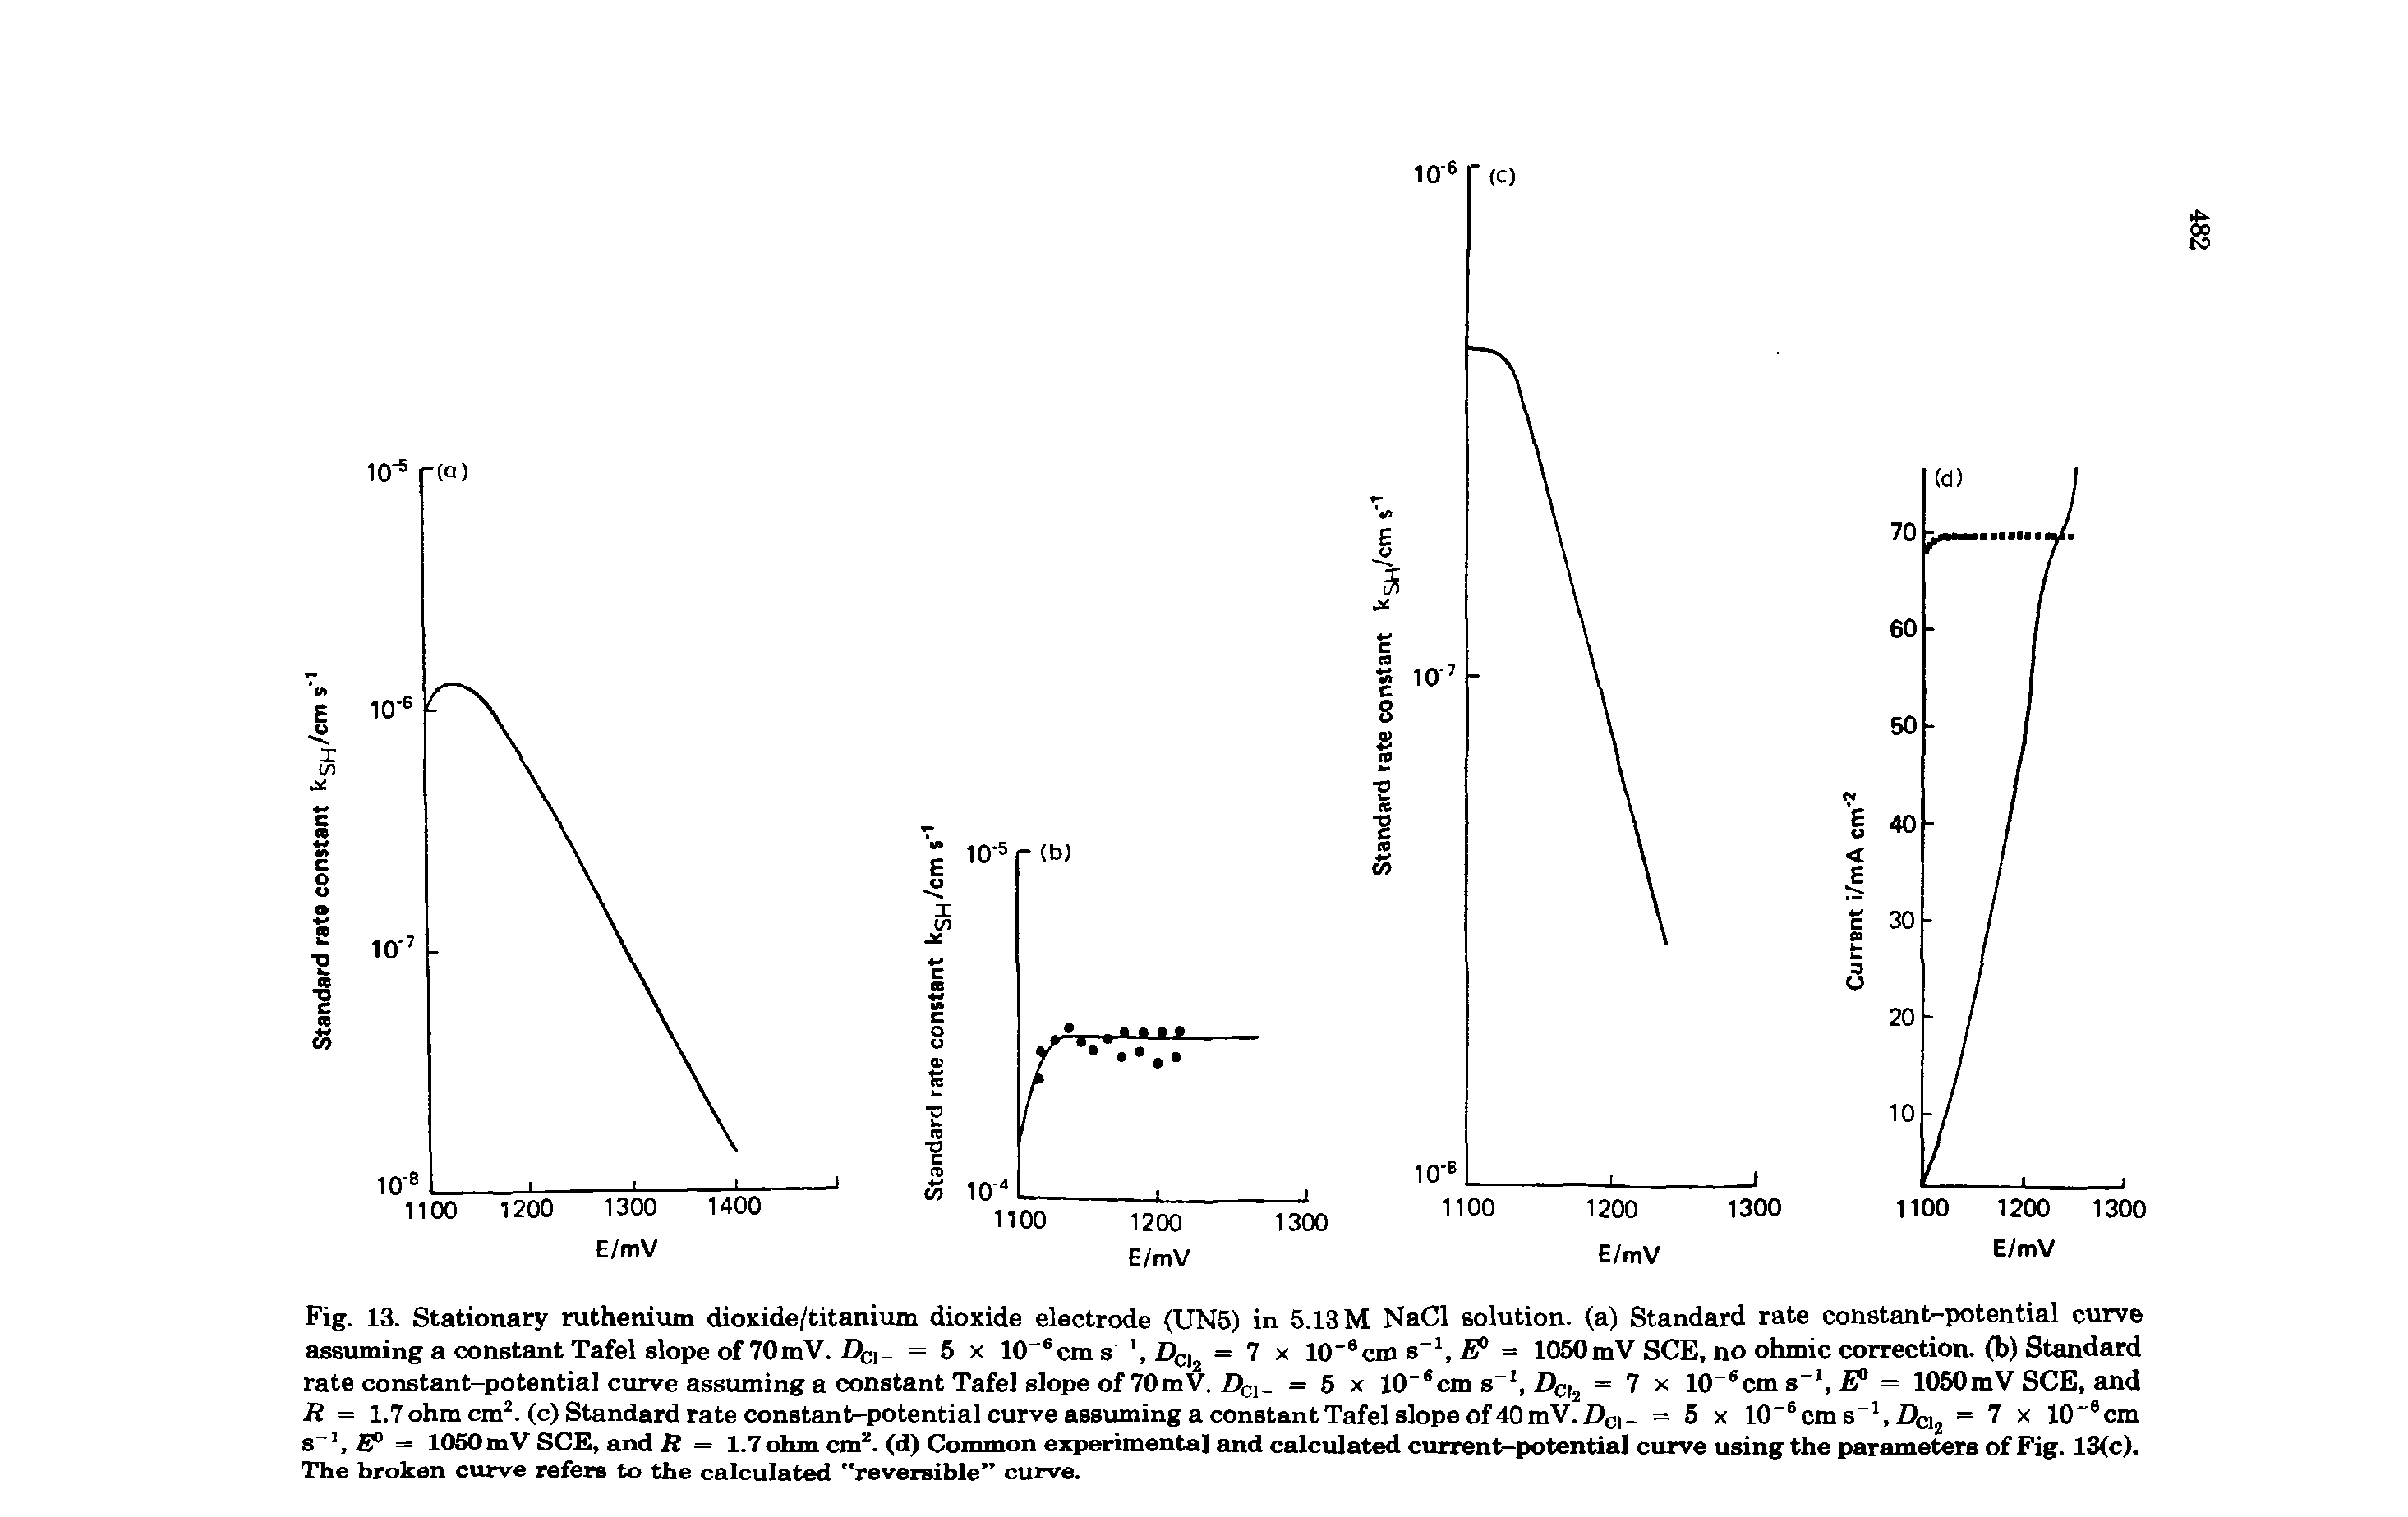 Fig. 13. Stationary ruthenium dioxide/titanium dioxide electrode (UN5) in 5.13 M NaCl solution, (a) Standard rate constant-potential curve assuming a constant Tafel slope of 70 mV. DC) = 5 x 10 6cm s Z)C 2 = 7 x 10"6 cm s1, E = 1050 mV SCE, no ohmic correction, (b) Standard rate constant-potential curve assuming a constant Tafel slope of 70 mV. Z)C1 = 5 x 10"ecm s-1, Dc,2 = 7 x 10 6cm s, ° = 1050mV SCE, and R = 1.7 ohm cm2, (c) Standard rate constant-potential curve assuming a constant Tafel slope of 40 mV. DCI = 5 x 10-6cm s-1, Da = 7 x 10 9cm s->,fi° = 1050mV SCE, and ft = 1.7 ohm cm2, (d) Common experimental and calculated current-potential curve using the parameters of Fig. 13(c). The broken curve refers to the calculated "reversible curve.